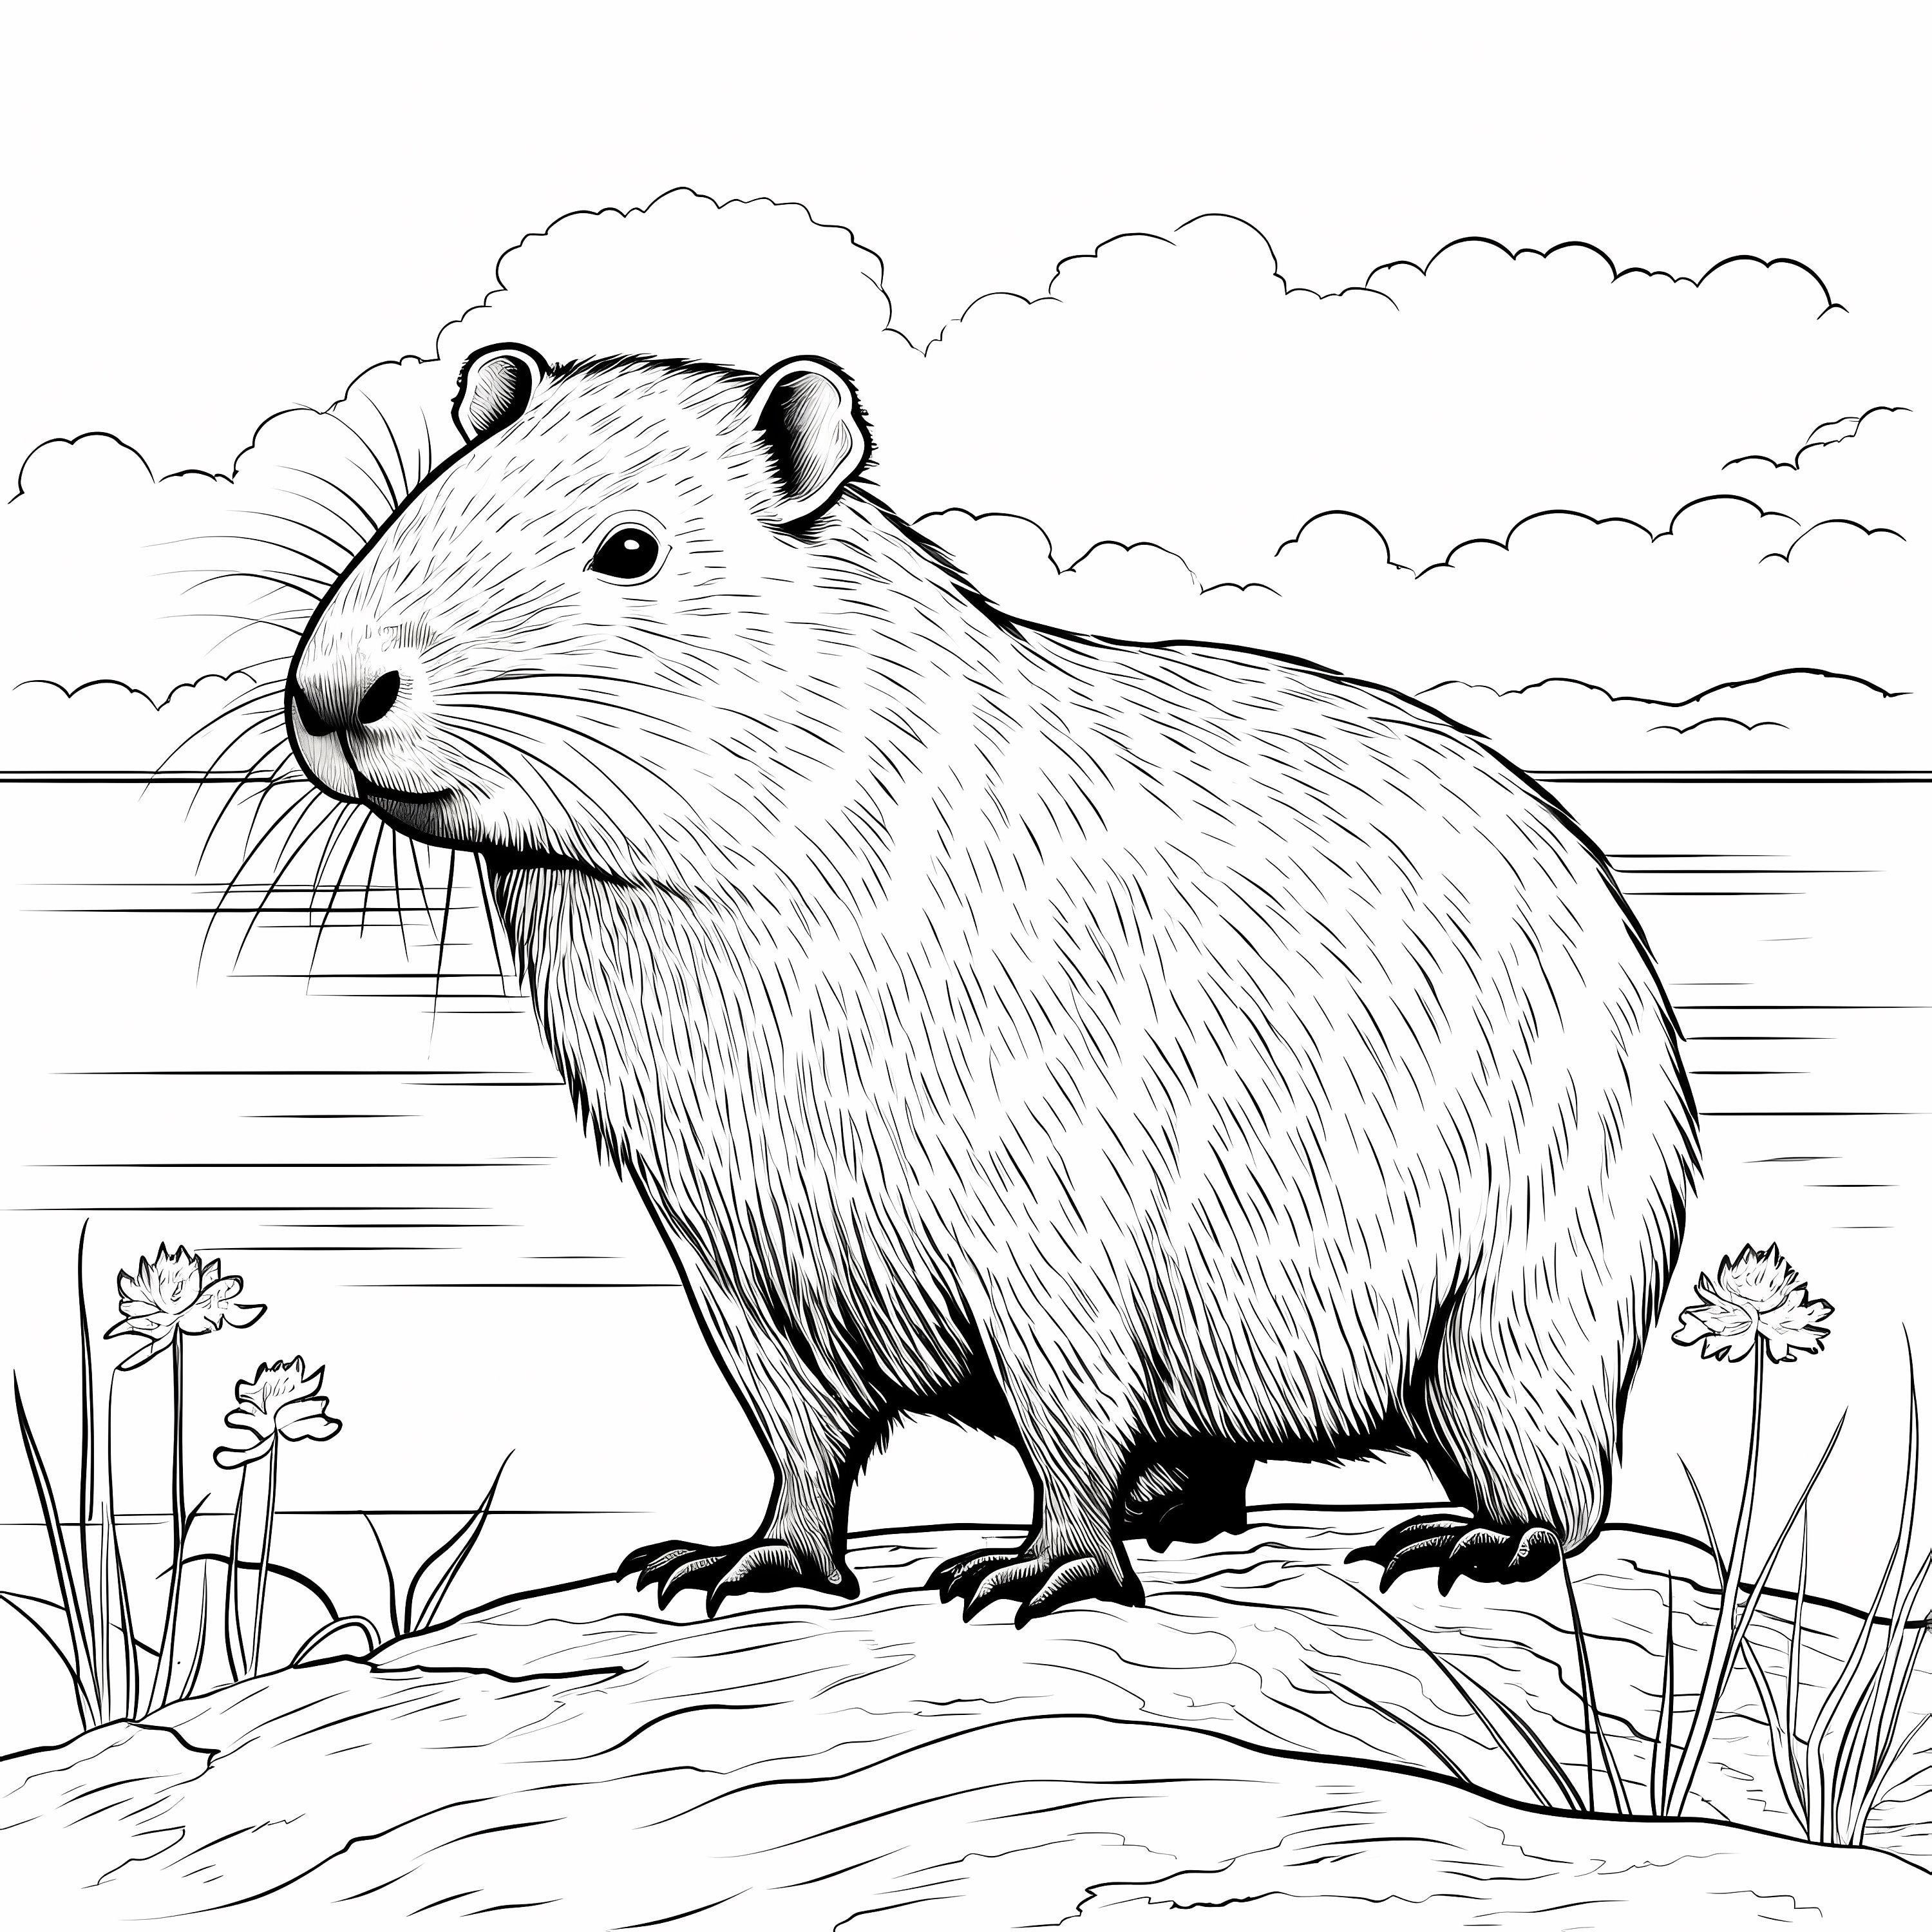 Pin by Gina on coloring  Capybara, Animal coloring pages, Adult coloring